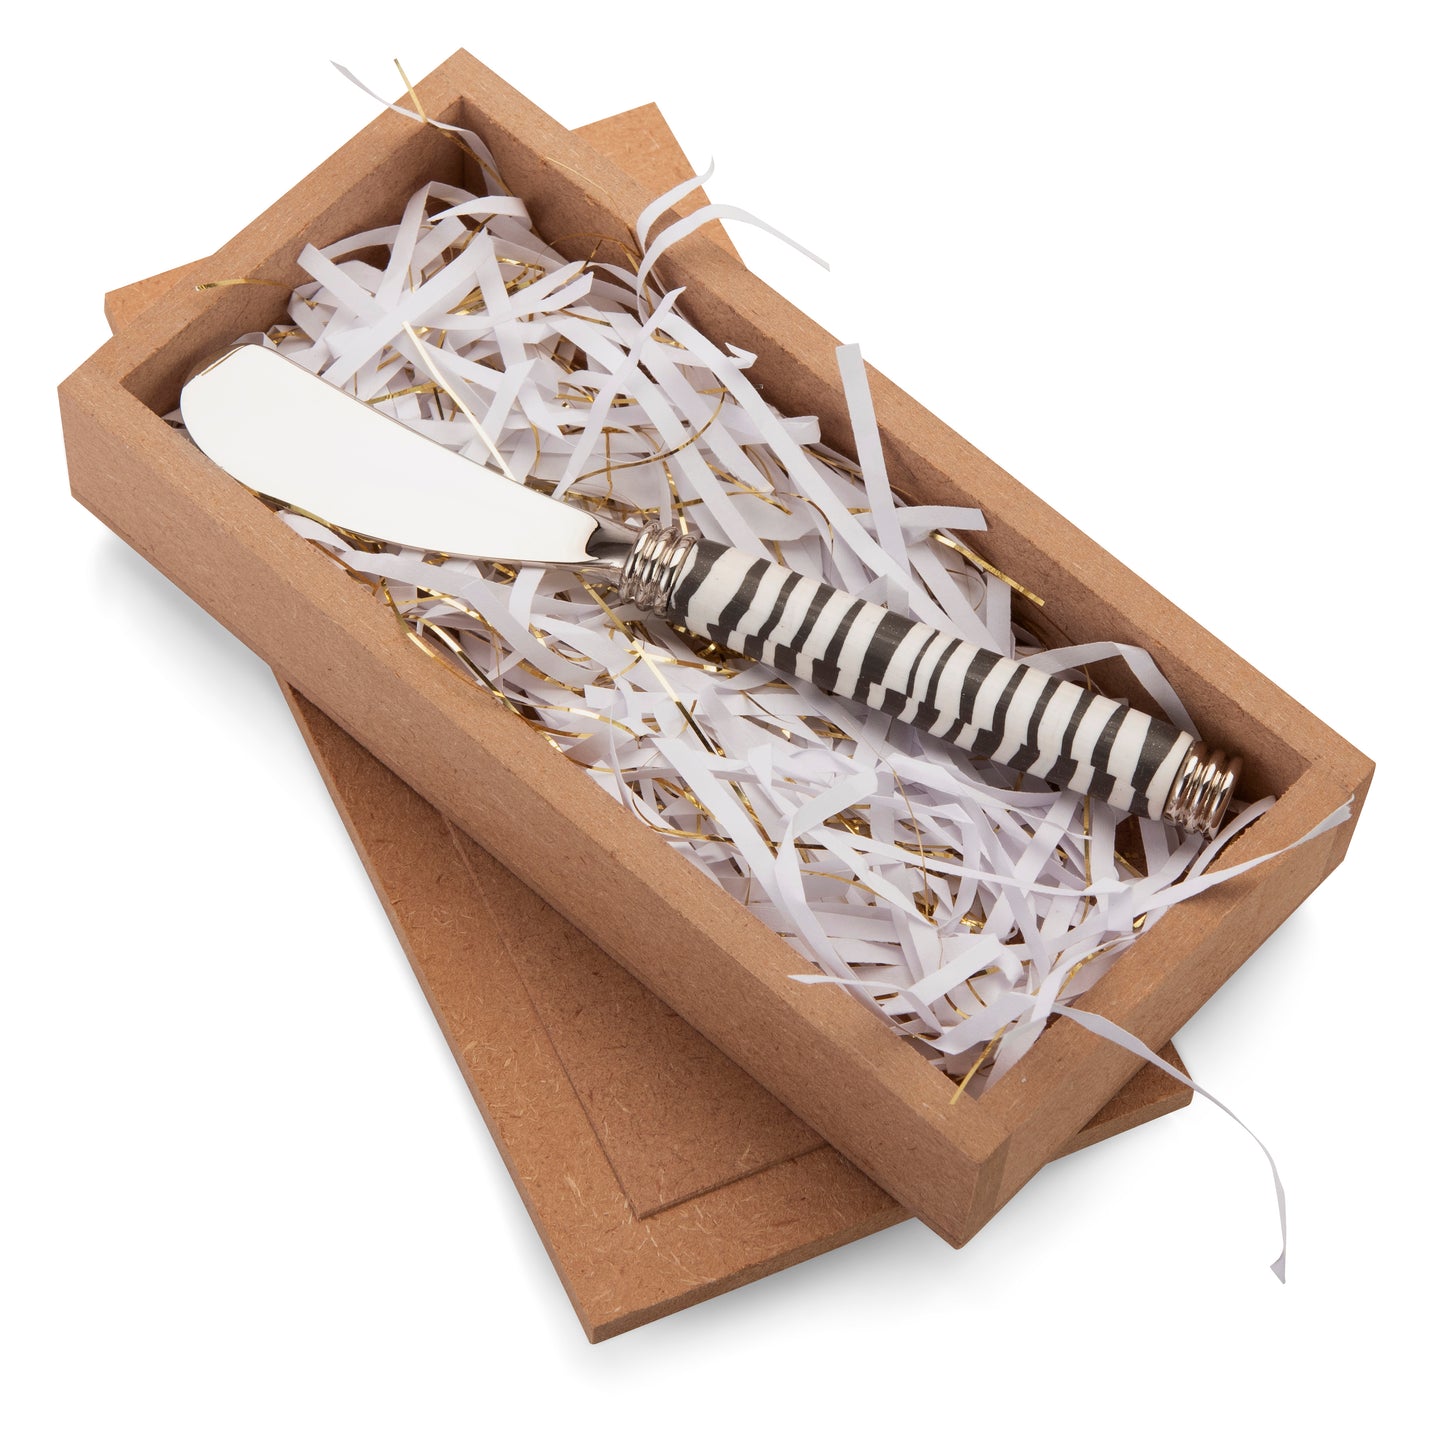 Fimo clay and silver-plated butterknife in a wooden gift box